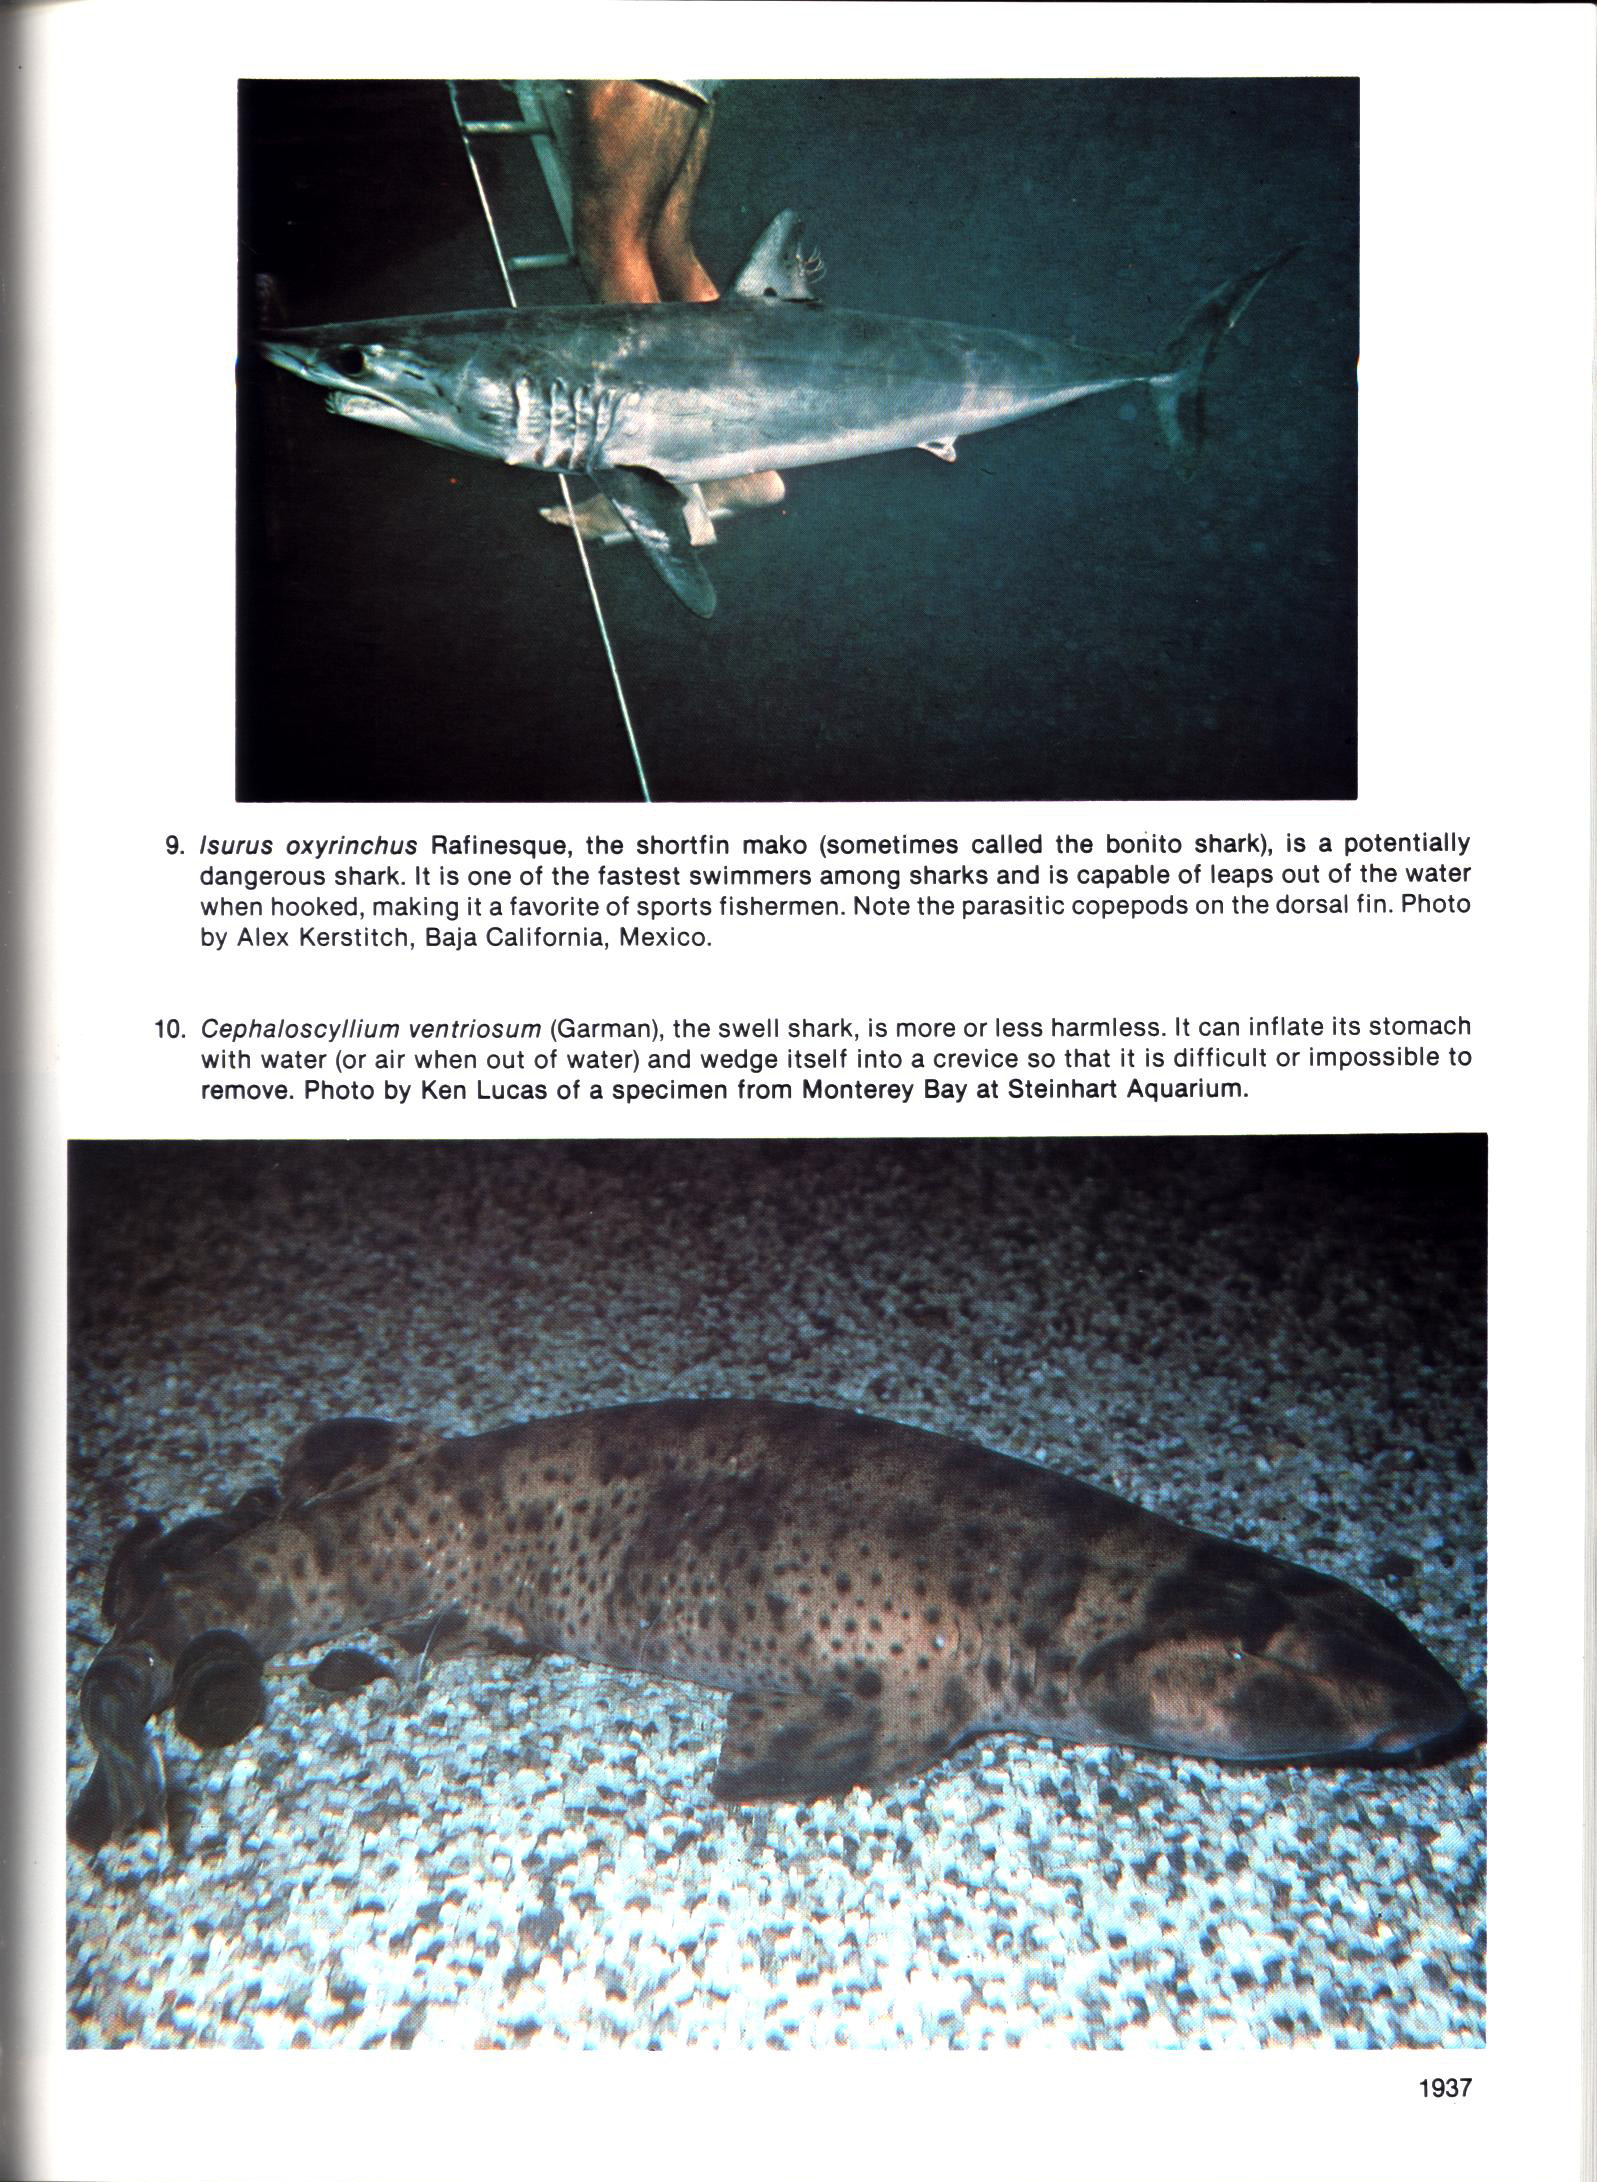 FISHES OF CALIFORNIA AND WESTERN MEXICO: Pacific marine fishes, Book 8 (California & Western Mexico). tfhp6102d